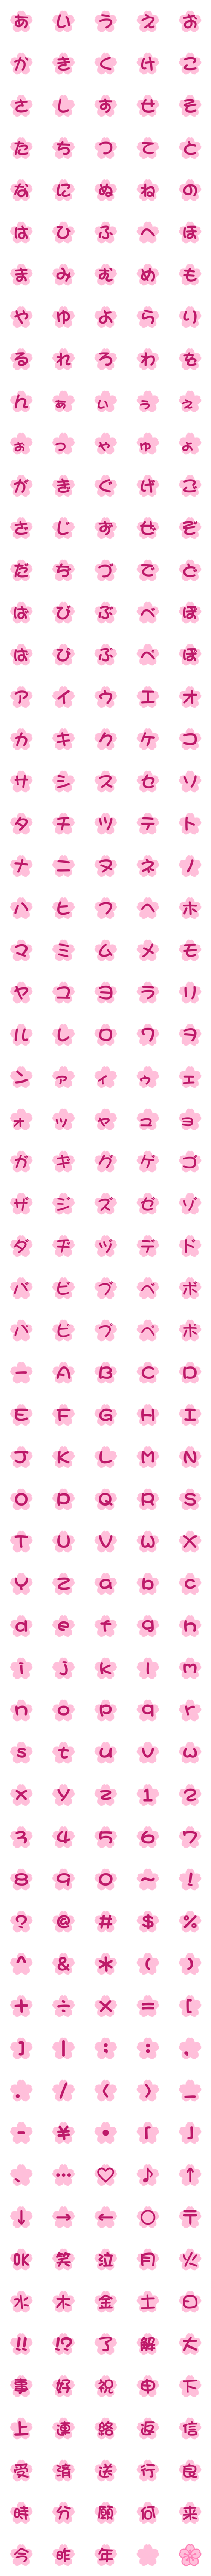 [LINE絵文字]桜のデコ文字305個セット！！の画像一覧